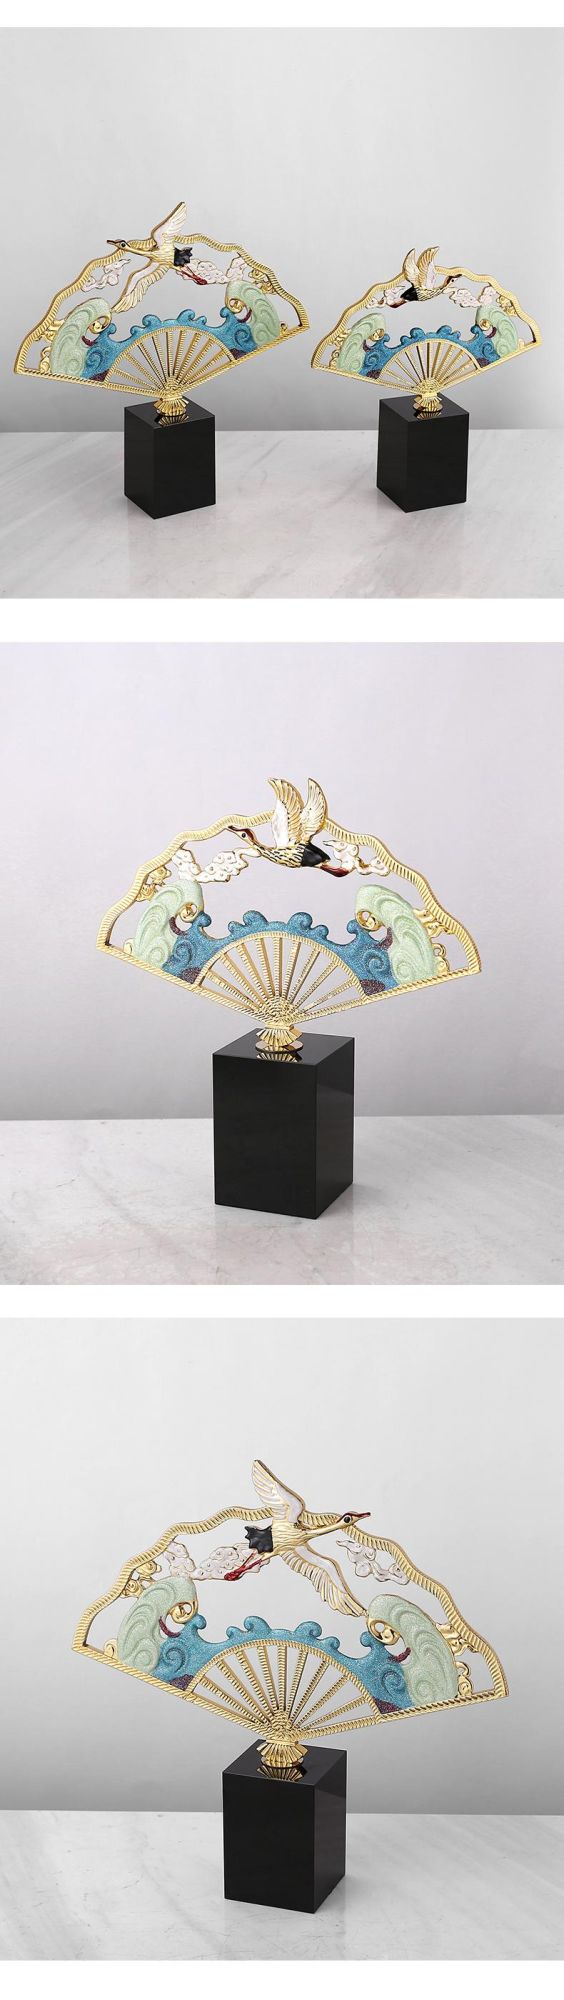 Chinese New Year Gift 2022 Decorative Fan Living Room Tables Decor Zinc Alloy Product Accessories